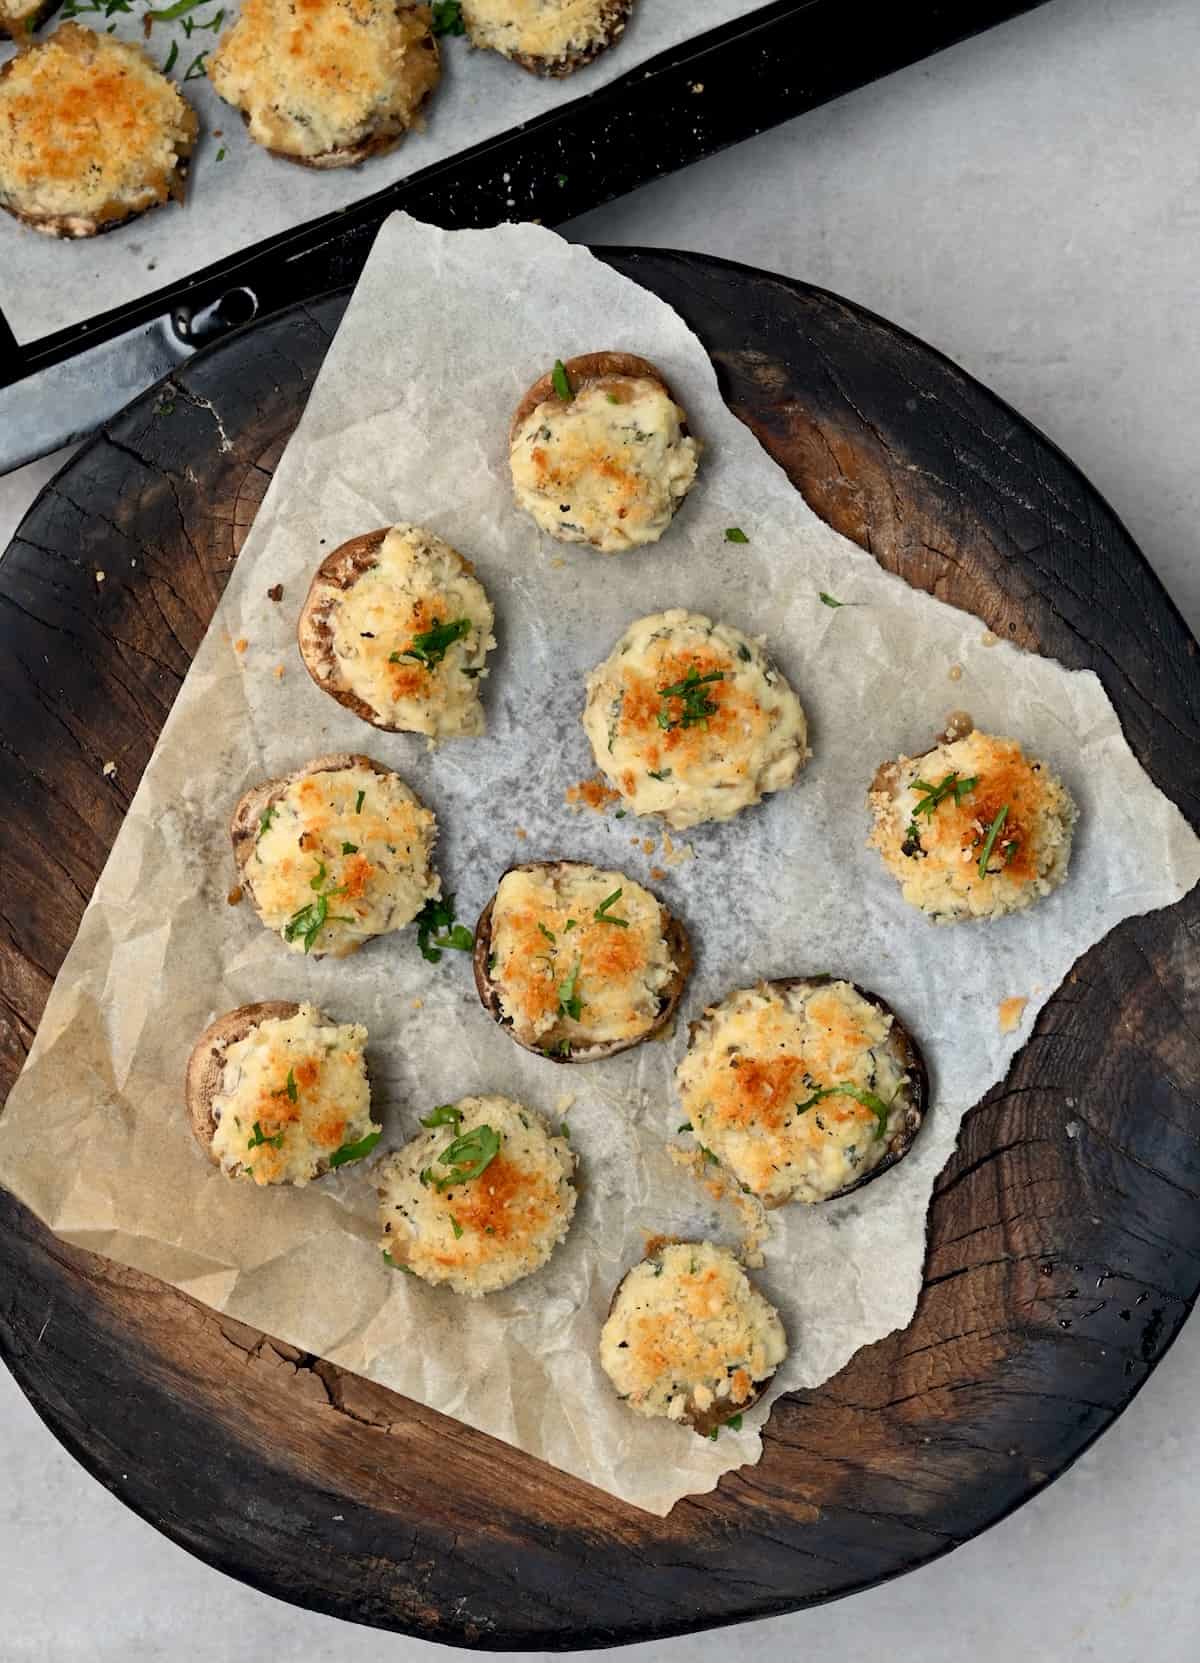 A platter with baked stuffed mushrooms topped with parmesan